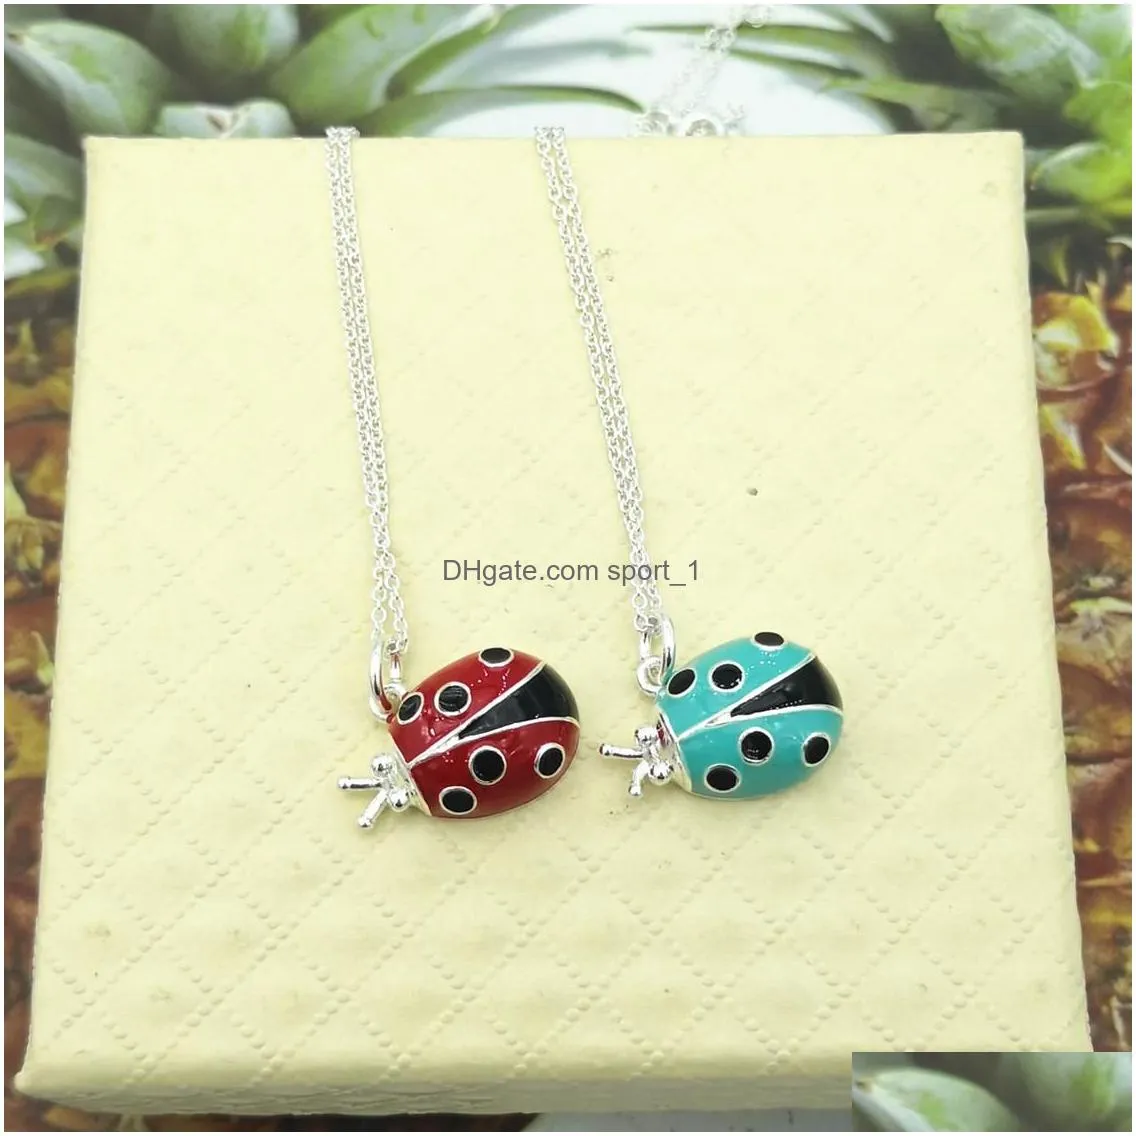 necklaces mrs sterling silver classic original red blue enamel scarab beetles o curb necklace pendant couples act the role ofing is